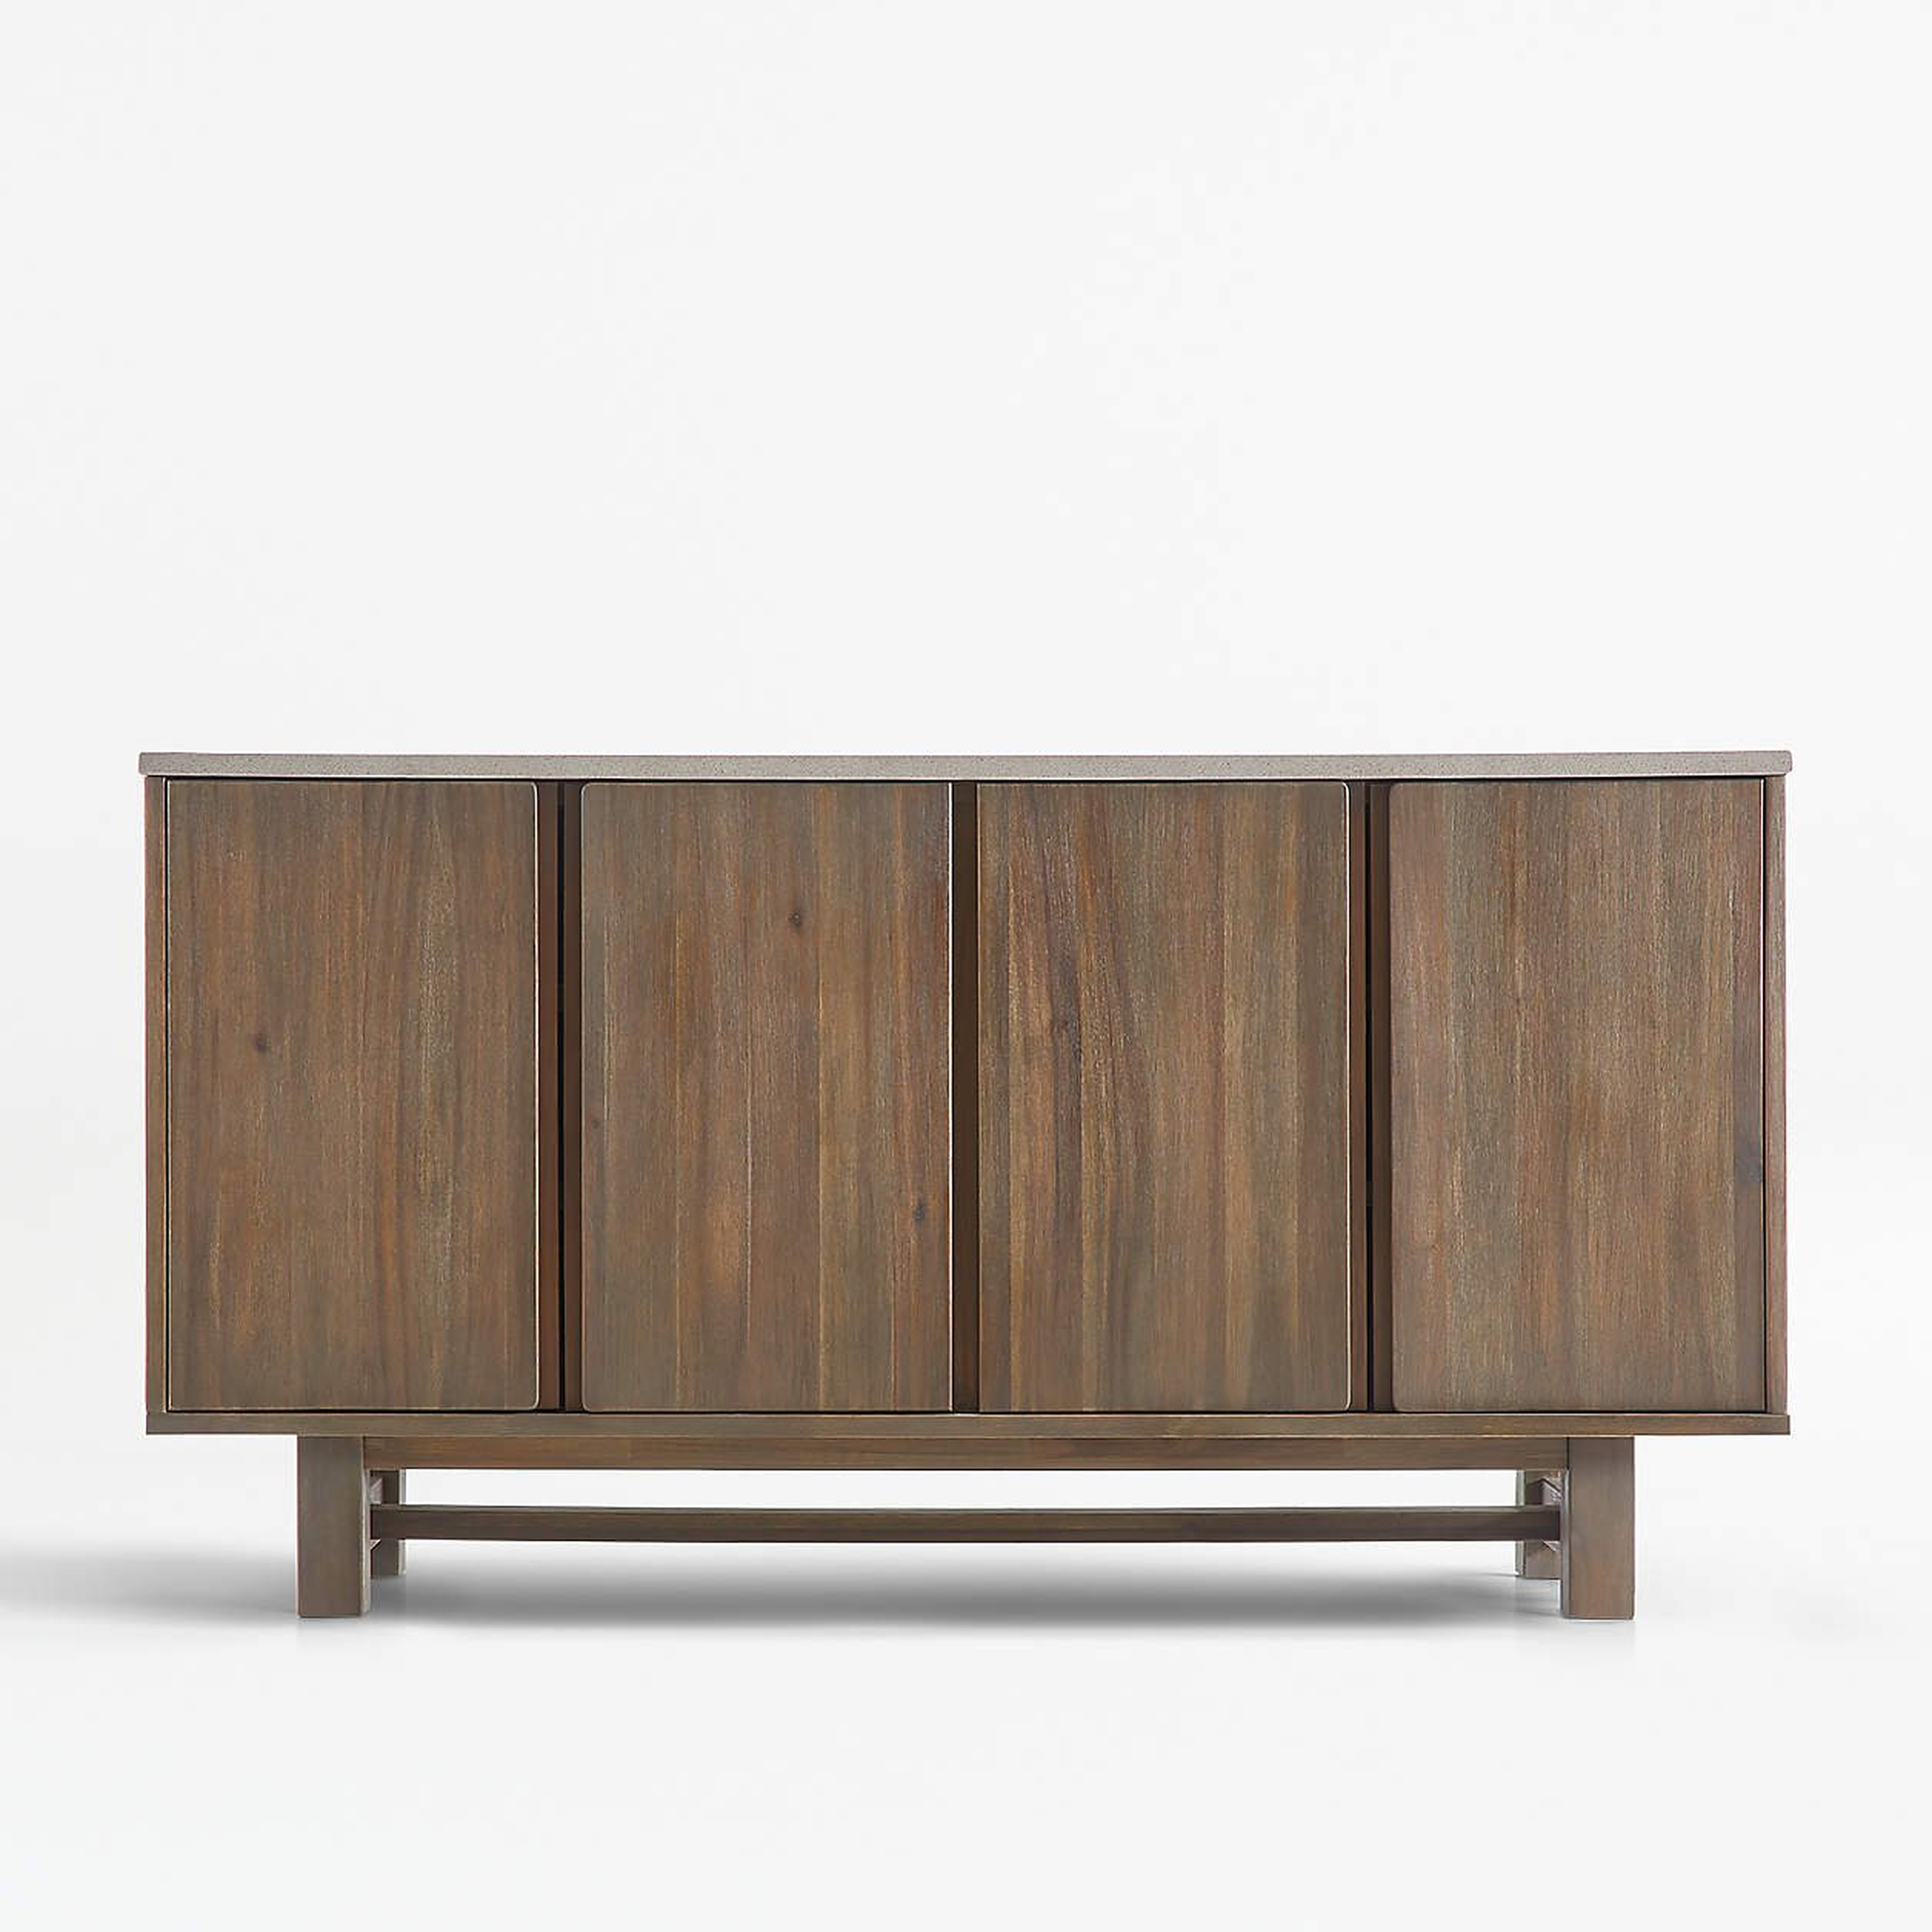 Caicos Cement Top Sideboard - Crate and Barrel